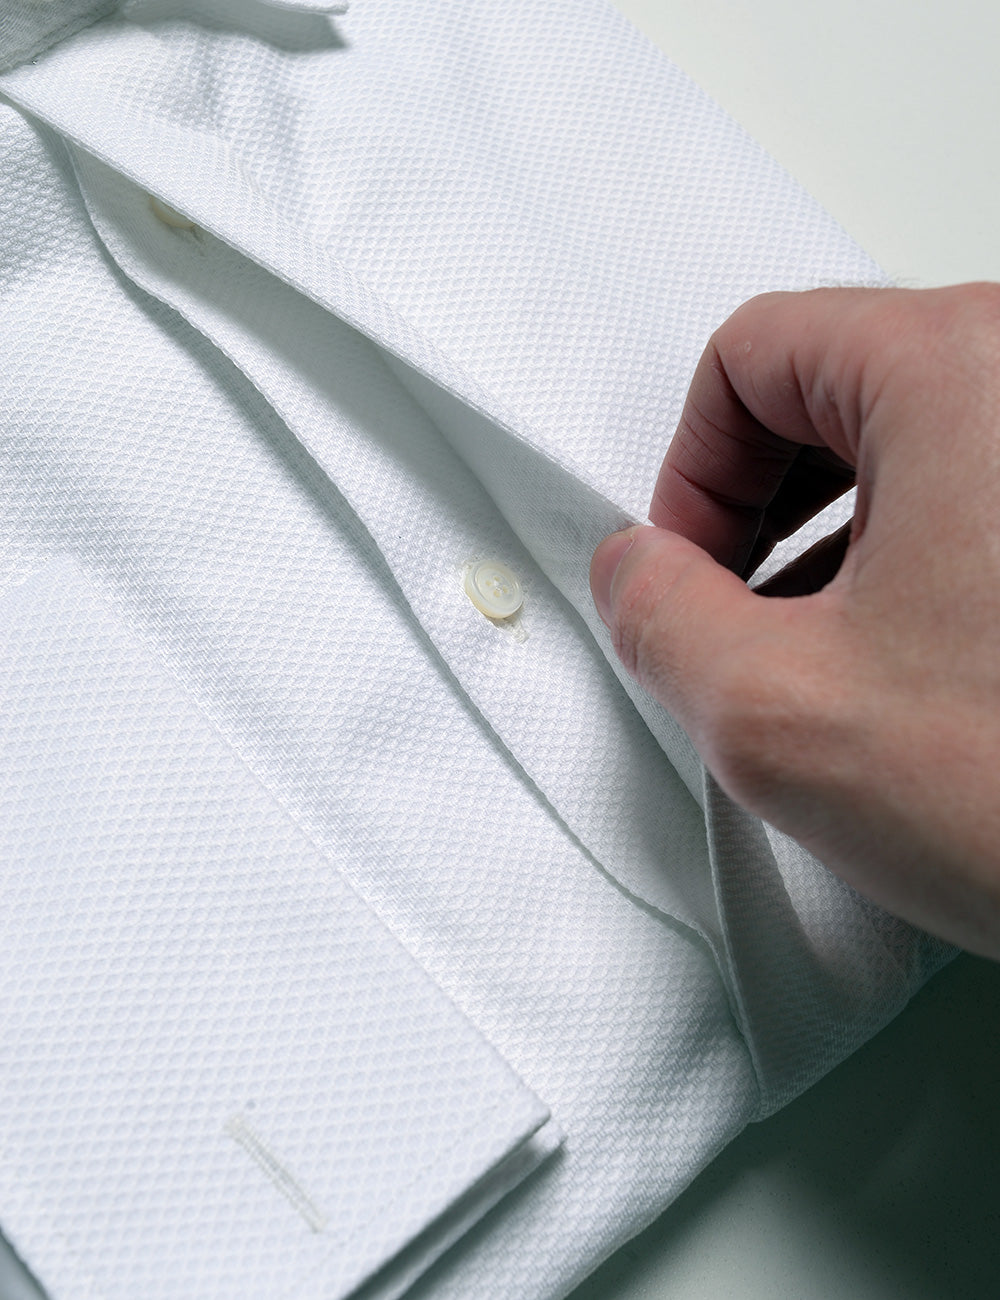 Detail shot showing a hand moving the covered placket to reveal the buttons underneath on Brooklyn Tailors BKT20 Classic French Cuff Tuxedo Shirt -  Waffle Pique